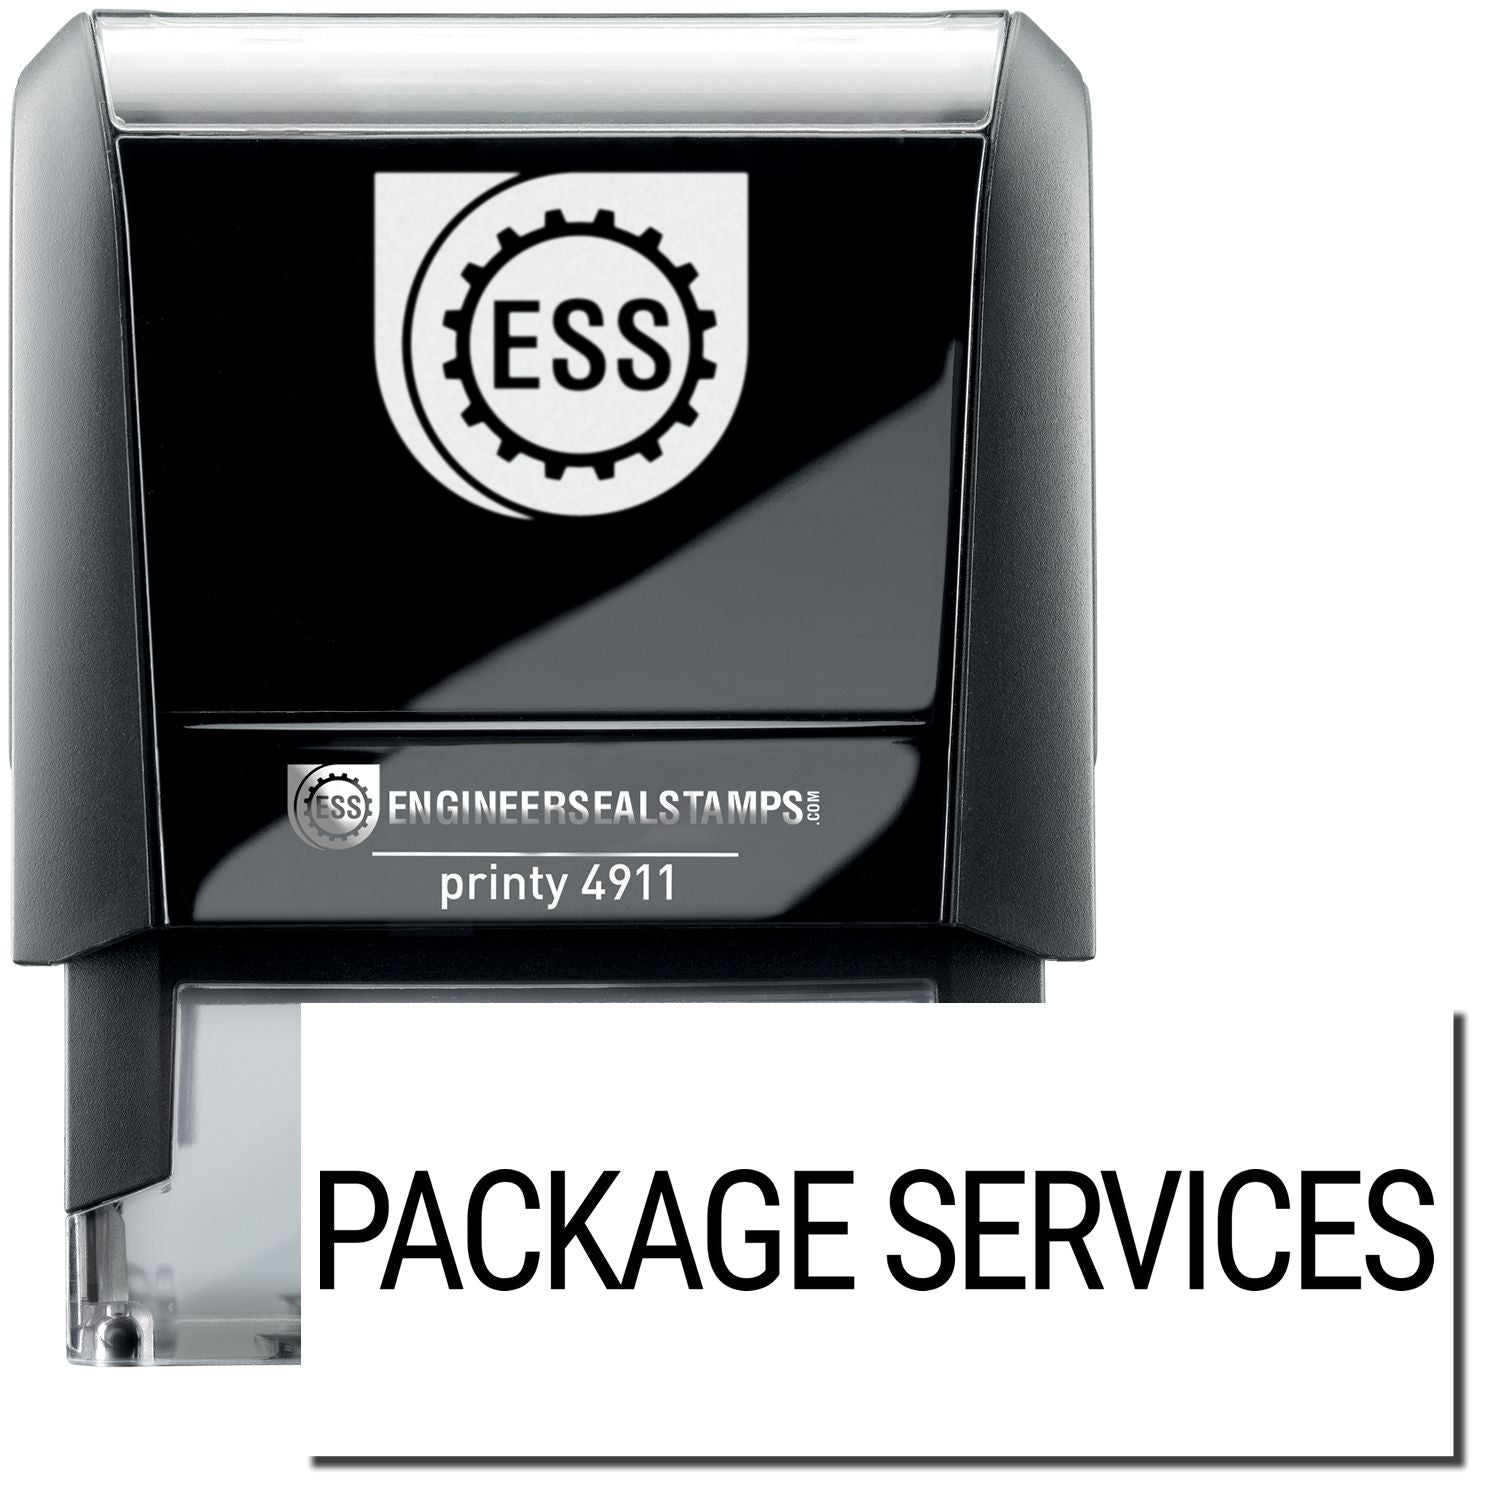 A self-inking stamp with a stamped image showing how the text "PACKAGE SERVICES" is displayed after stamping.